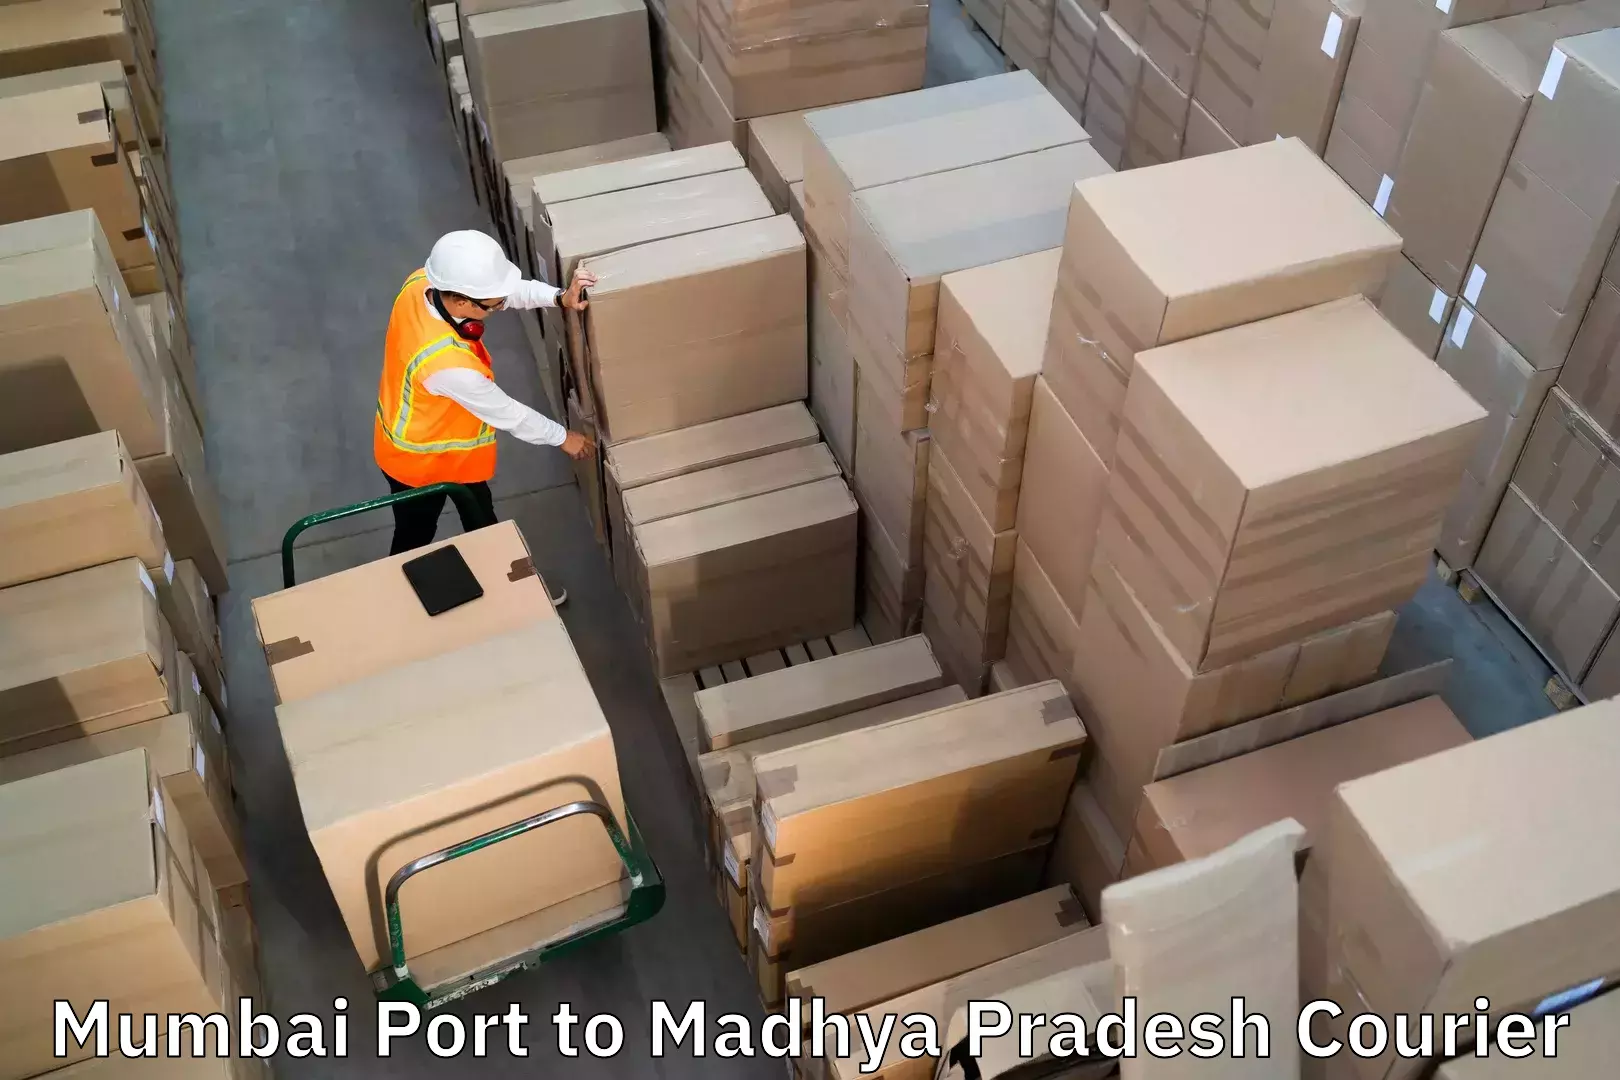 Reliable baggage delivery Mumbai Port to Nainpur